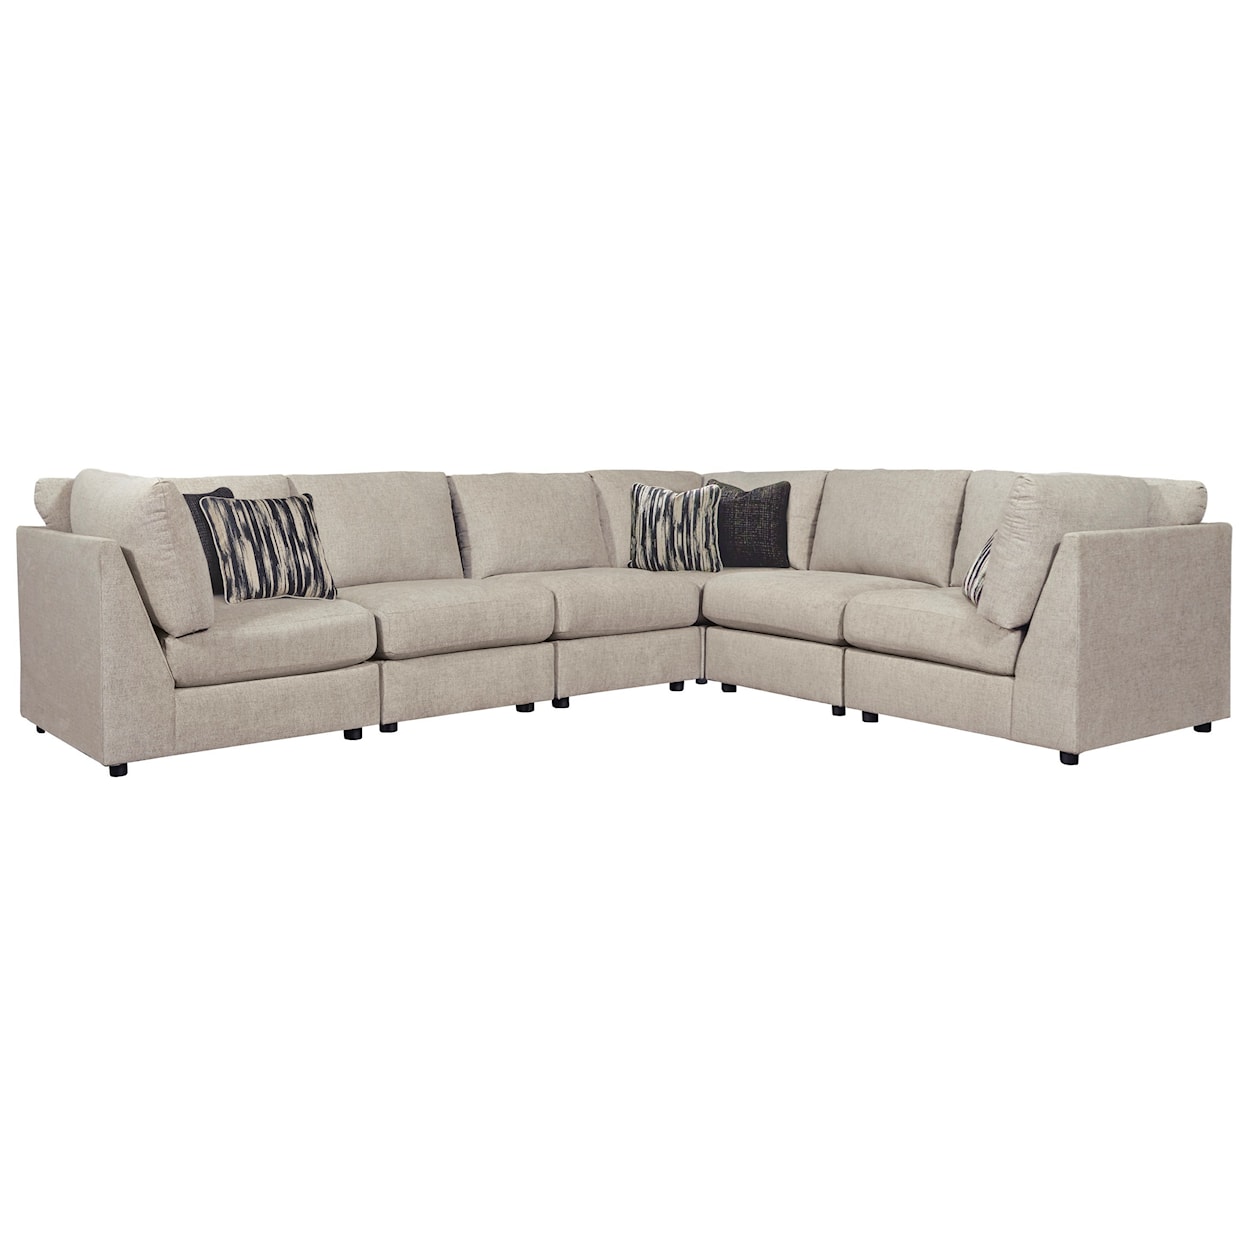 Signature Design by Ashley Kellway 6-Piece Sectional